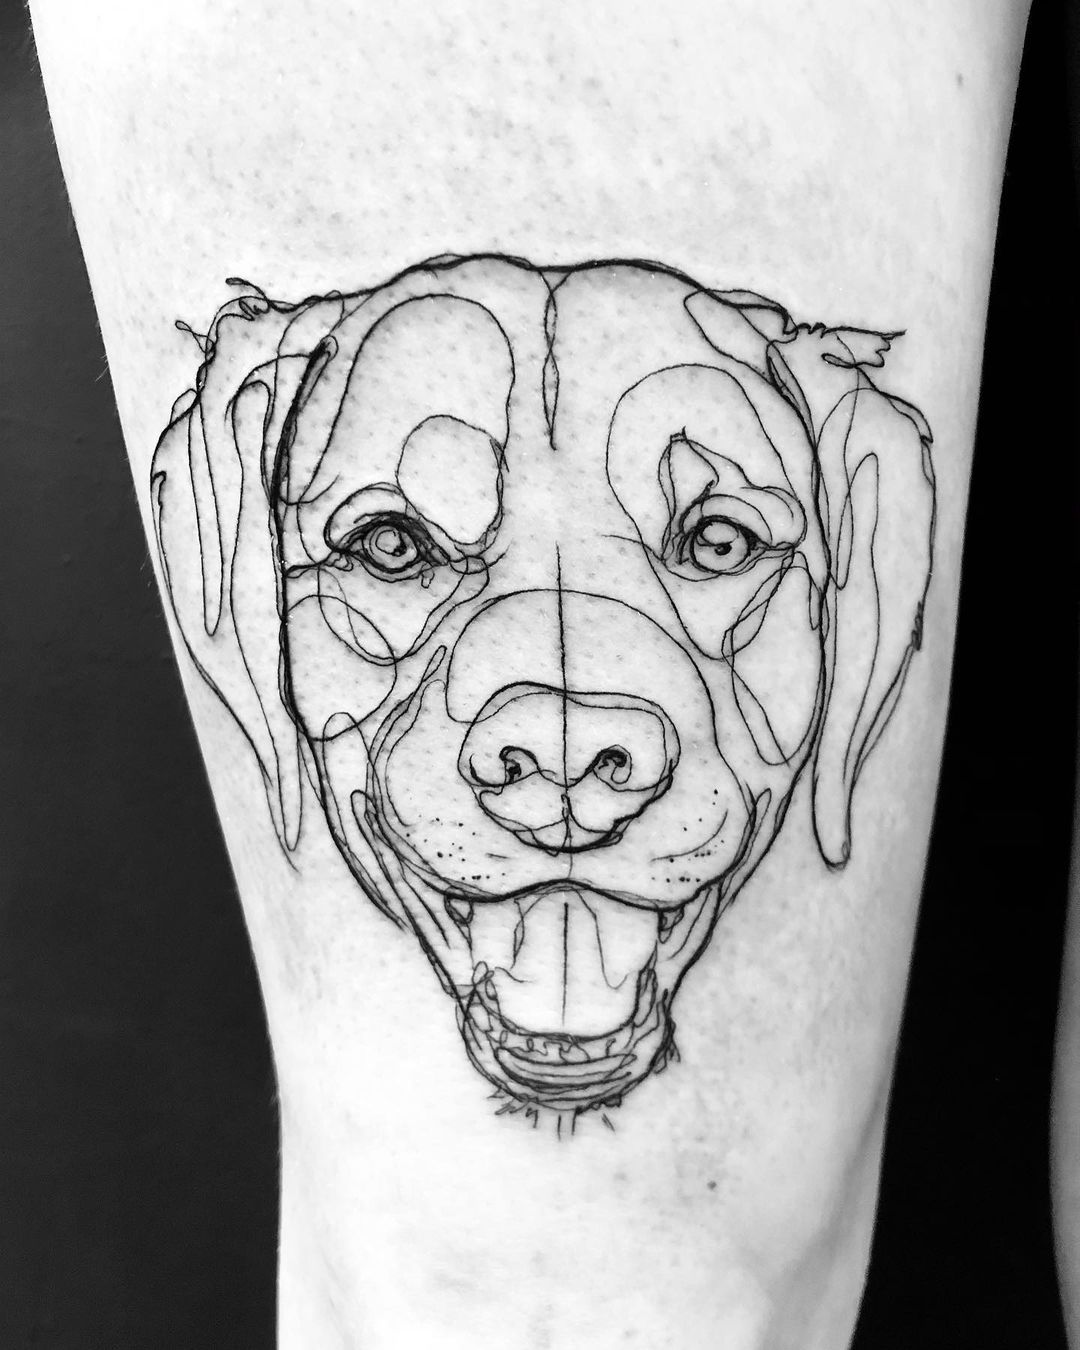 26 Stunning Pieces of Body Art You Wont Regret Spoiler Alert Theyre Dog  Tattoos  BARK Post